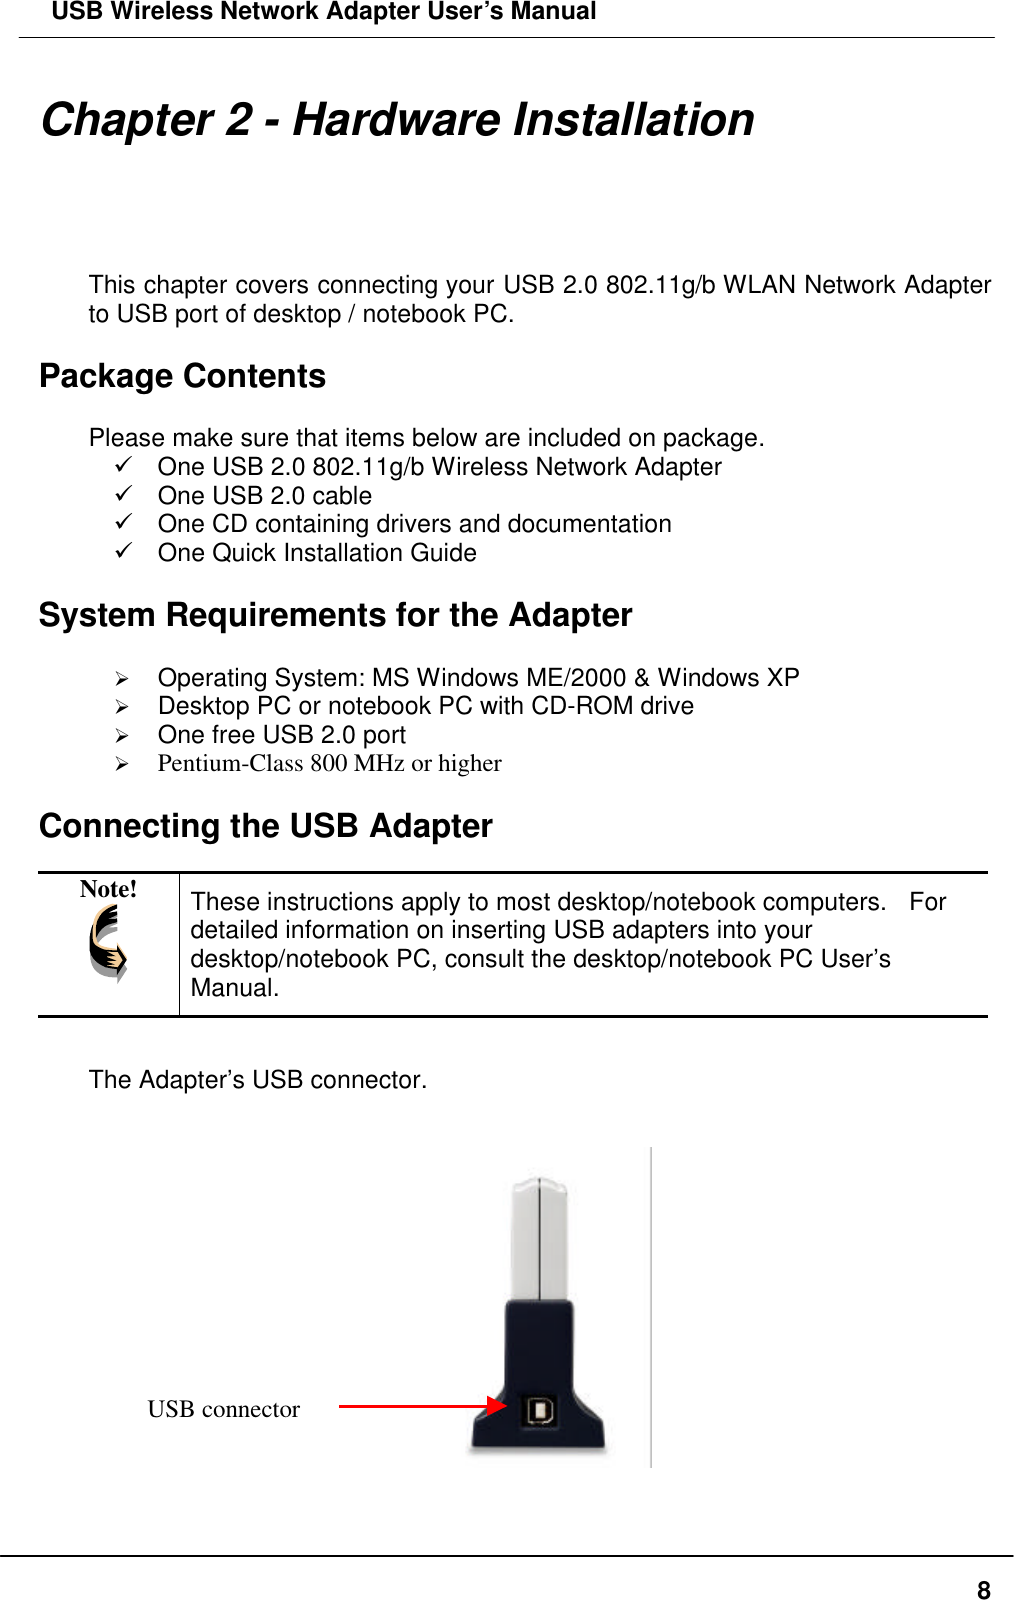  USB Wireless Network Adapter User’s Manual  8Chapter 2 - Hardware Installation This chapter covers connecting your USB 2.0 802.11g/b WLAN Network Adapter to USB port of desktop / notebook PC.  Package Contents  Please make sure that items below are included on package. ü One USB 2.0 802.11g/b Wireless Network Adapter ü One USB 2.0 cable ü One CD containing drivers and documentation ü One Quick Installation Guide  System Requirements for the Adapter  Ø Operating System: MS Windows ME/2000 &amp; Windows XP   Ø Desktop PC or notebook PC with CD-ROM drive Ø One free USB 2.0 port Ø Pentium-Class 800 MHz or higher  Connecting the USB Adapter  Note!  These instructions apply to most desktop/notebook computers.  For detailed information on inserting USB adapters into your desktop/notebook PC, consult the desktop/notebook PC User’s Manual.  The Adapter’s USB connector.      USB connector 